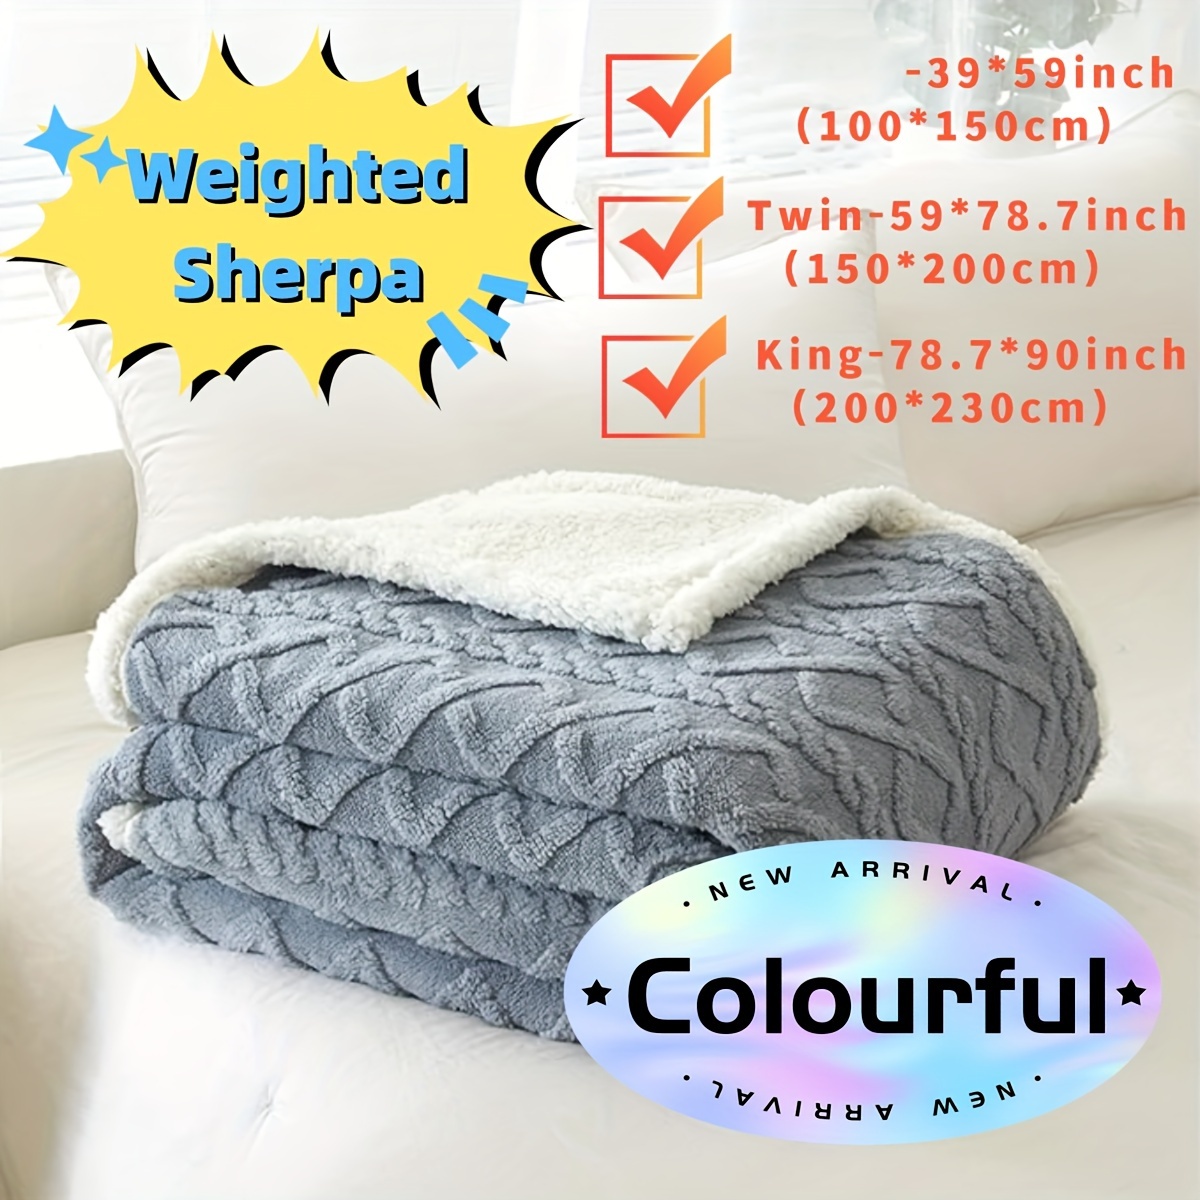 

1pc Sherpa Blanket For Couch Sofa - Fuzzy Soft Cozy Blanket For Bed, Fleece Thick Warm Blanket For All Seasons, Fall Blanket